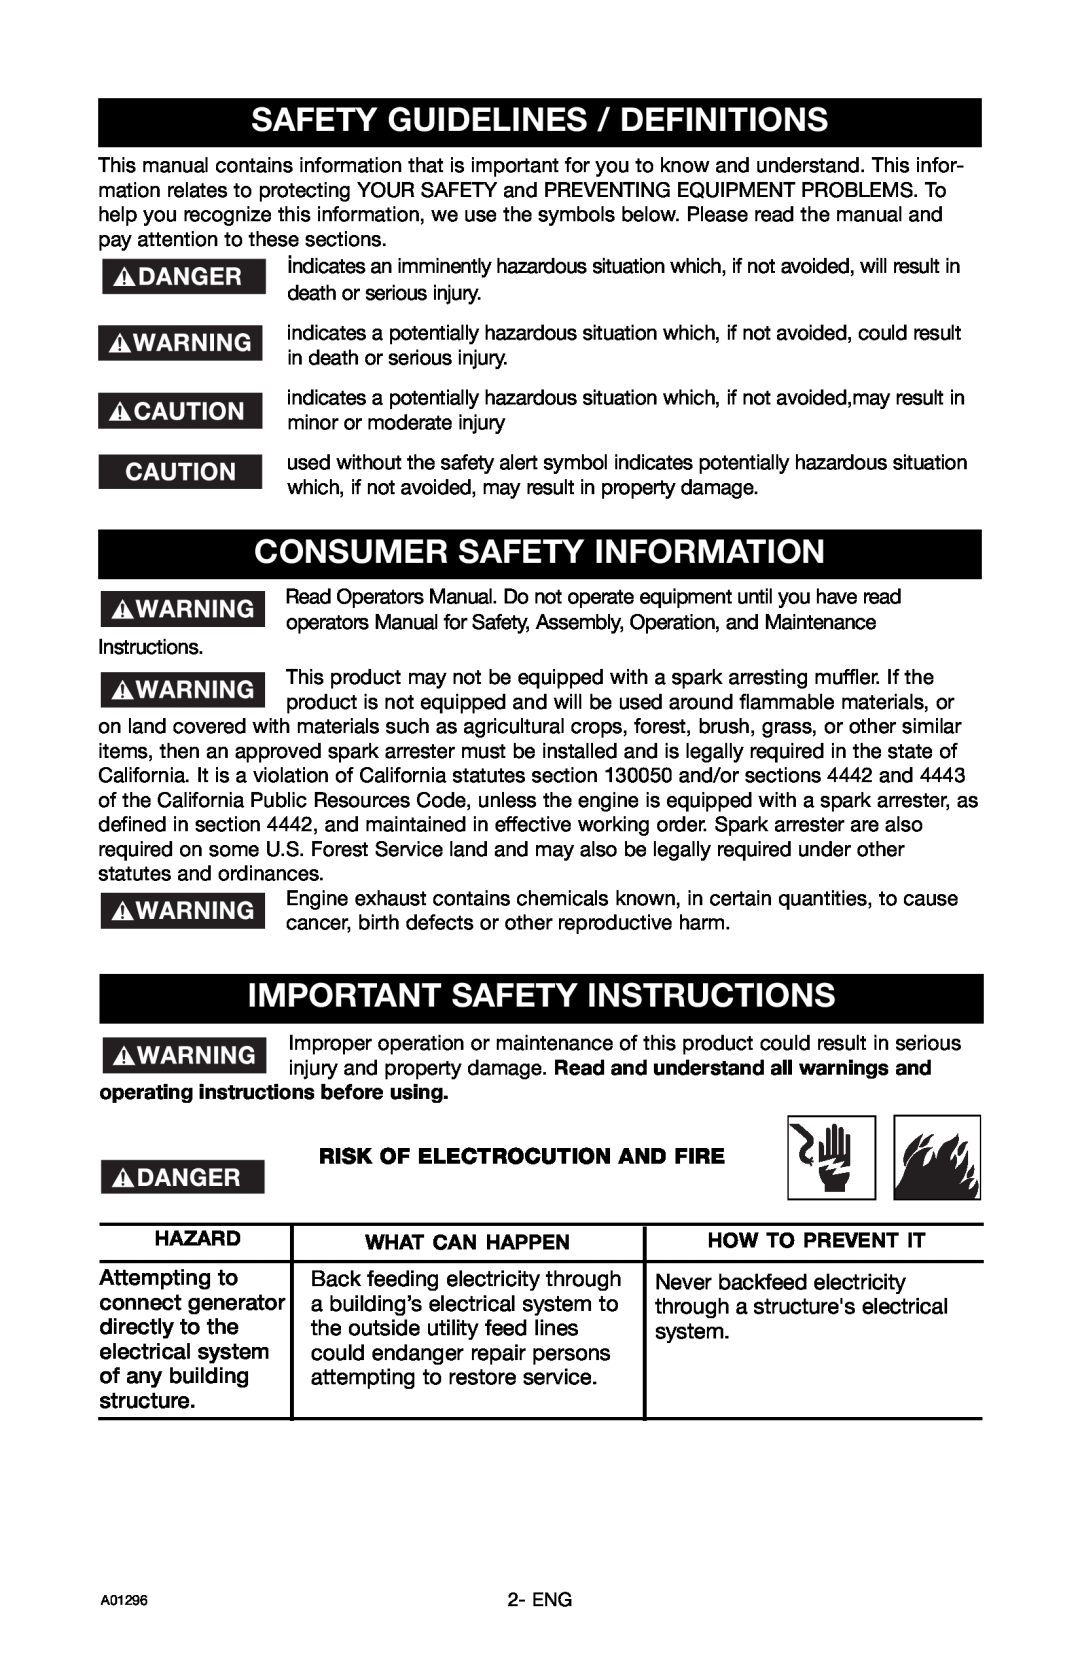 Porter-Cable H1000IS-W Safety Guidelines / Definitions, Consumer Safety Information, Important Safety Instructions 